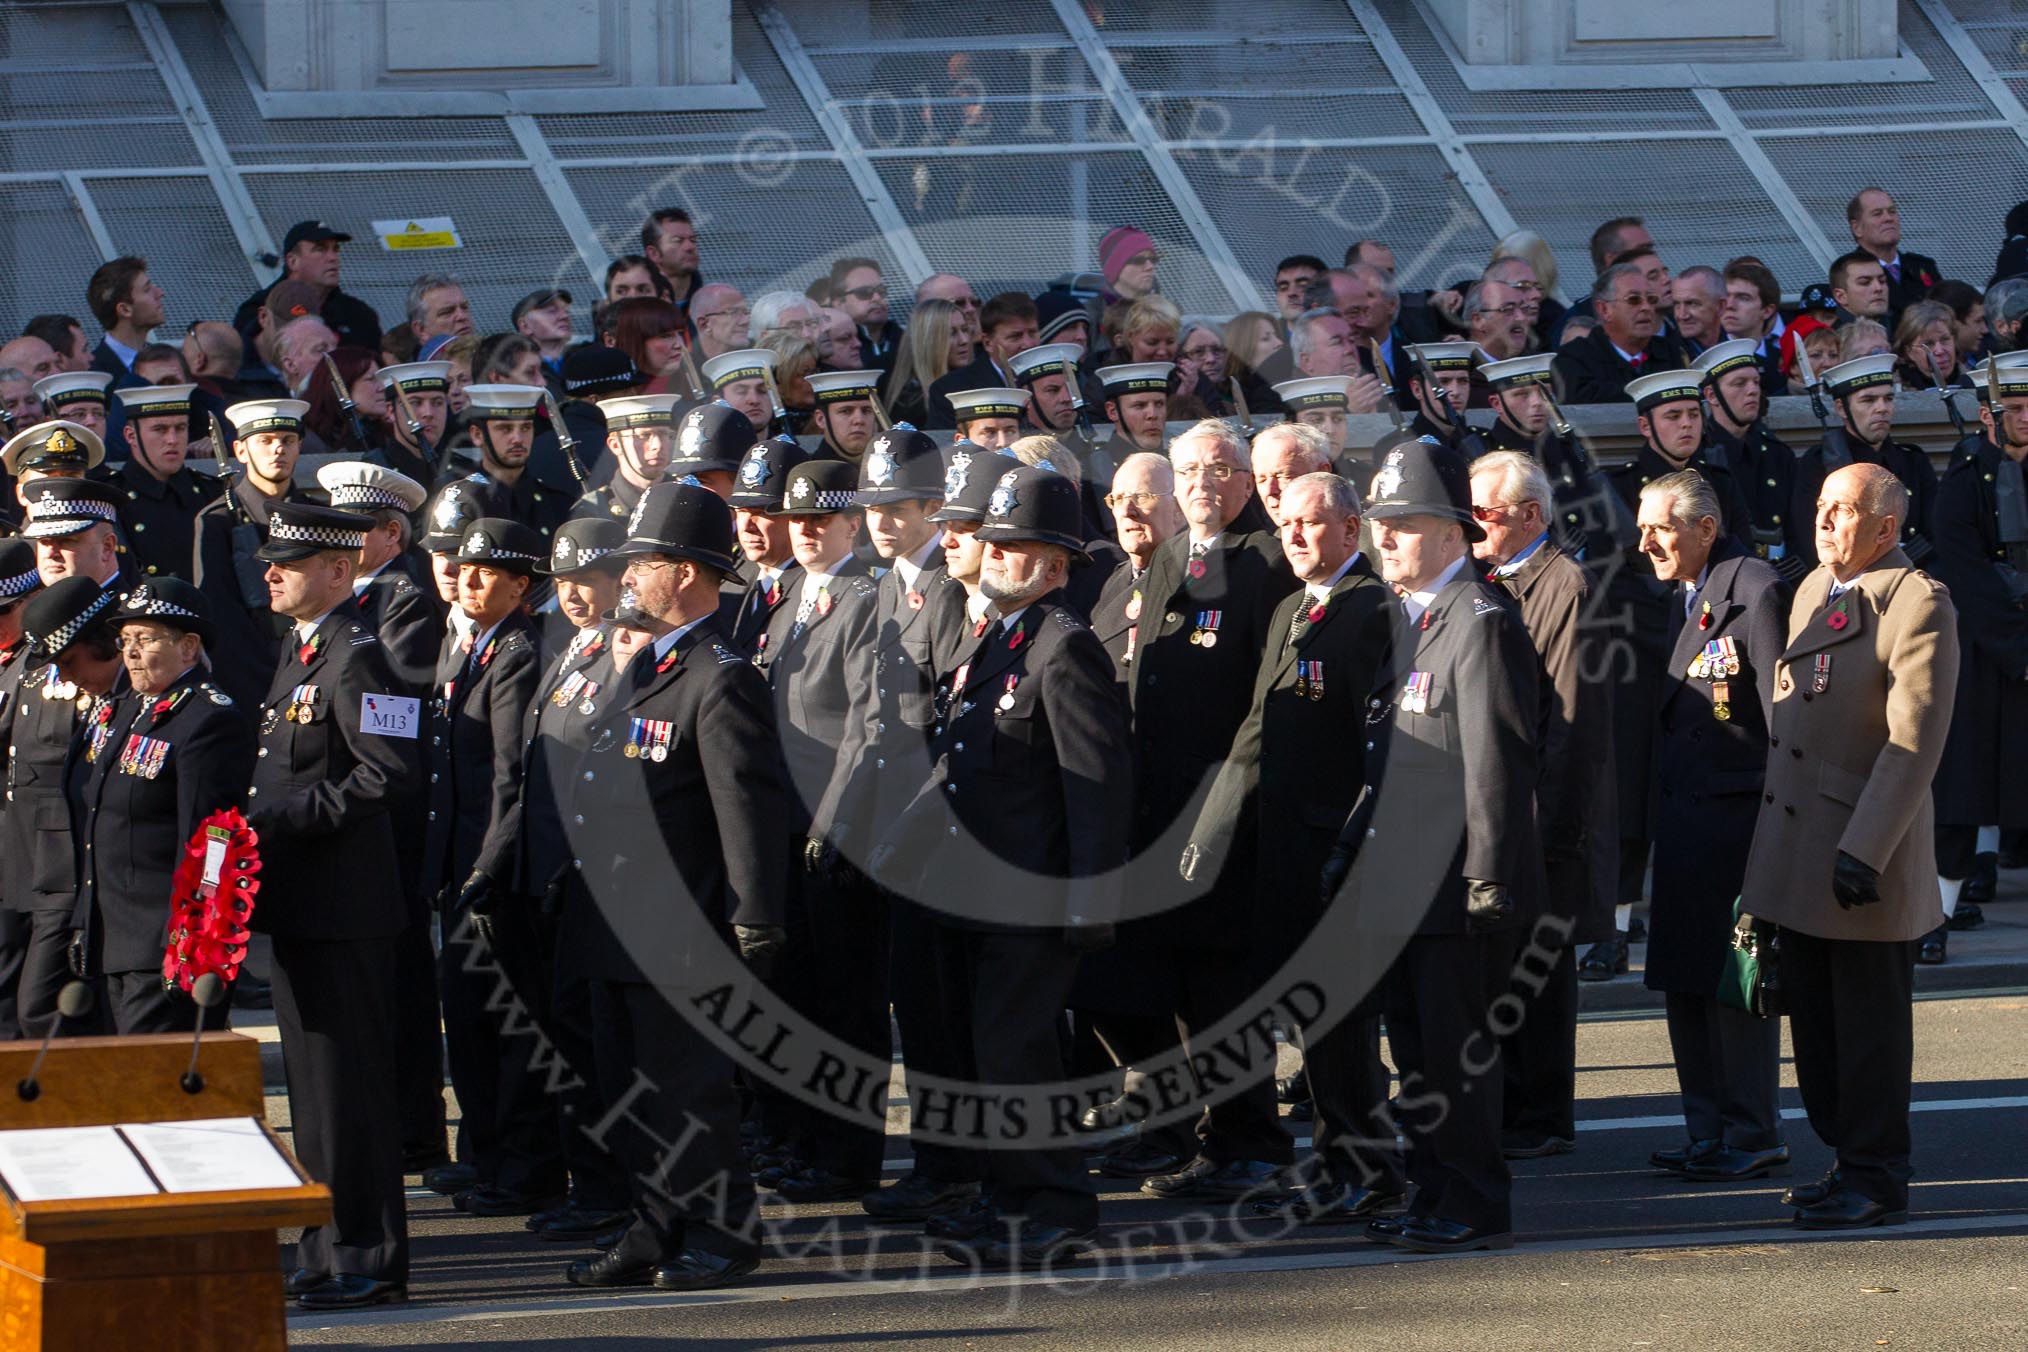 Remembrance Sunday 2012 Cenotaph March Past: Group M13 - Metropolitan Special Constabulary..
Whitehall, Cenotaph,
London SW1,

United Kingdom,
on 11 November 2012 at 12:11, image #1518